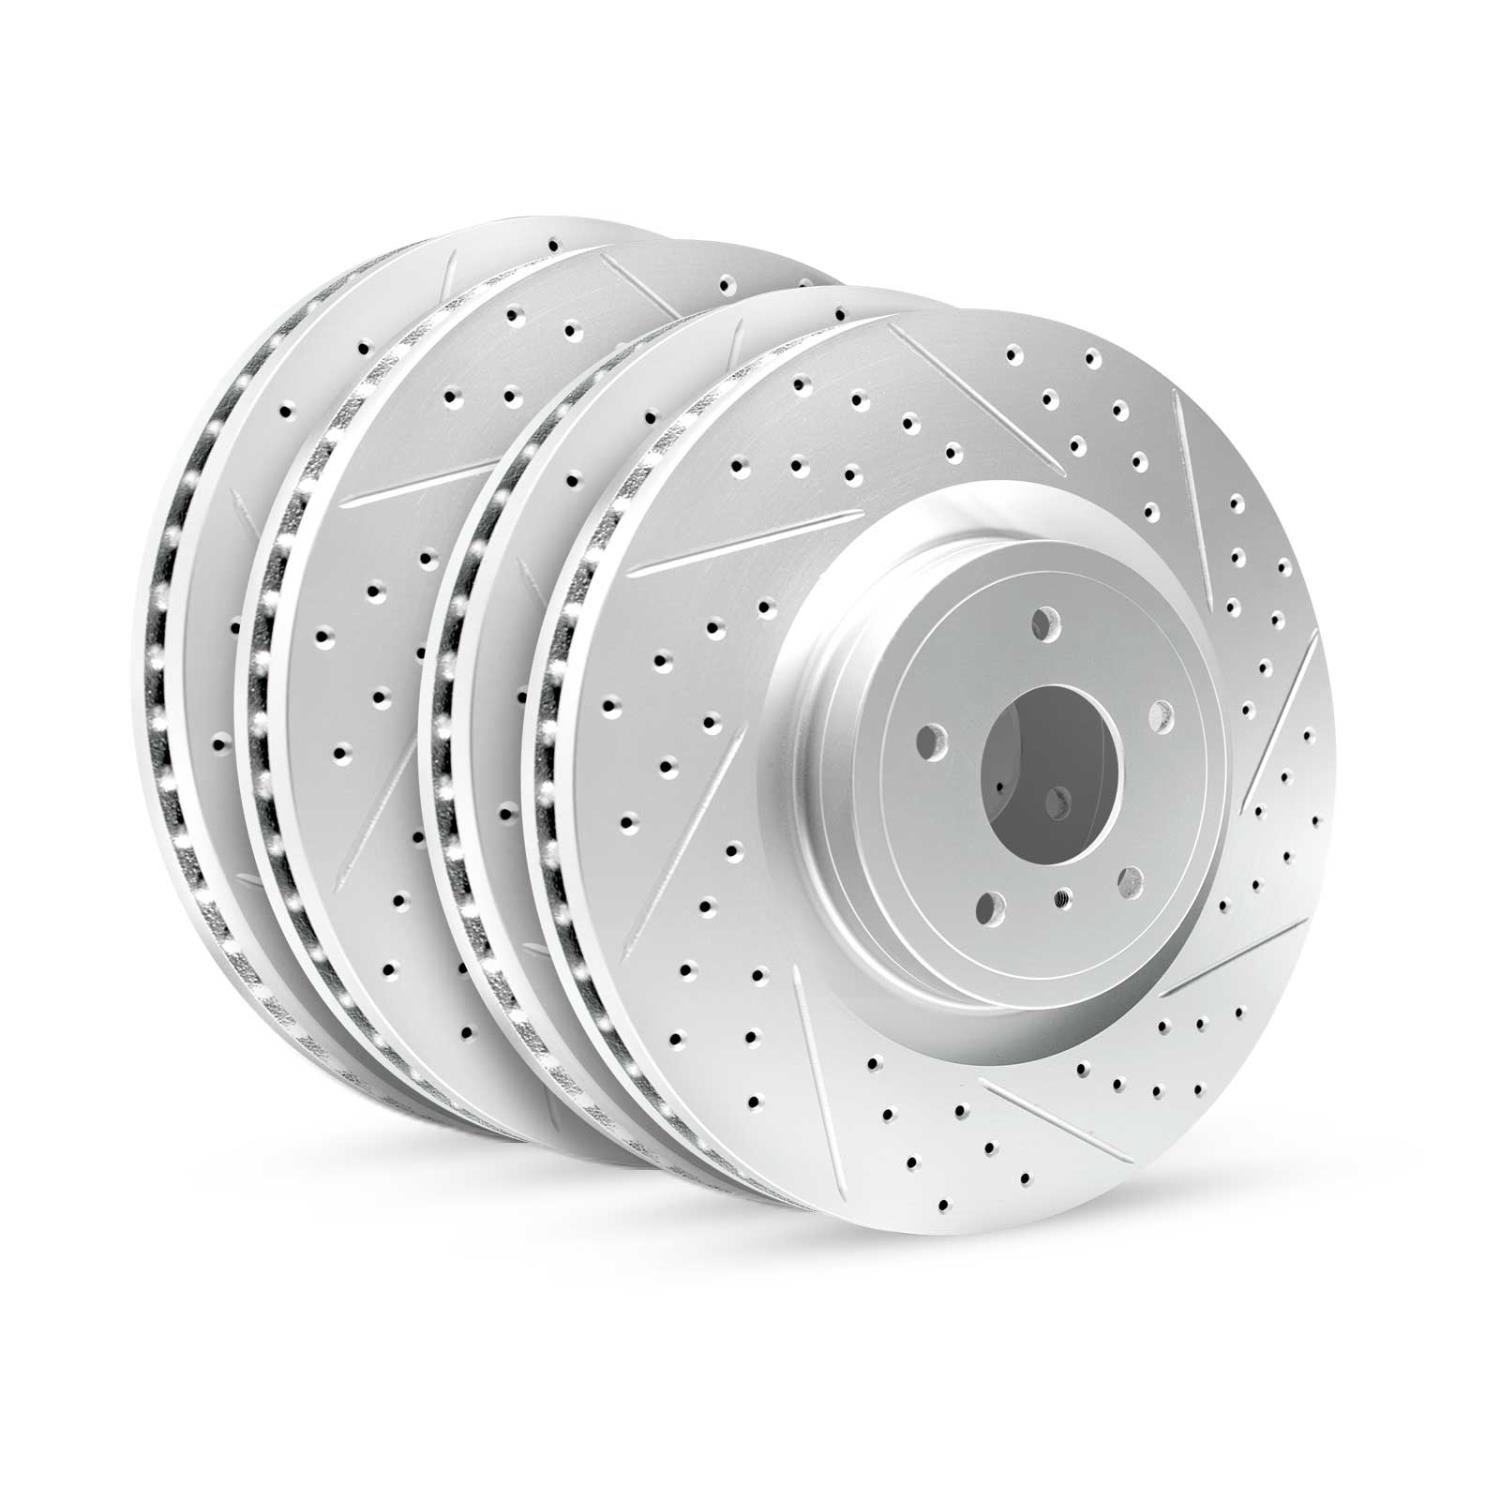 GEO-Carbon Drilled/Slotted Rotors, 2005-2016 Kia/Hyundai/Genesis, Position: Front/Rear